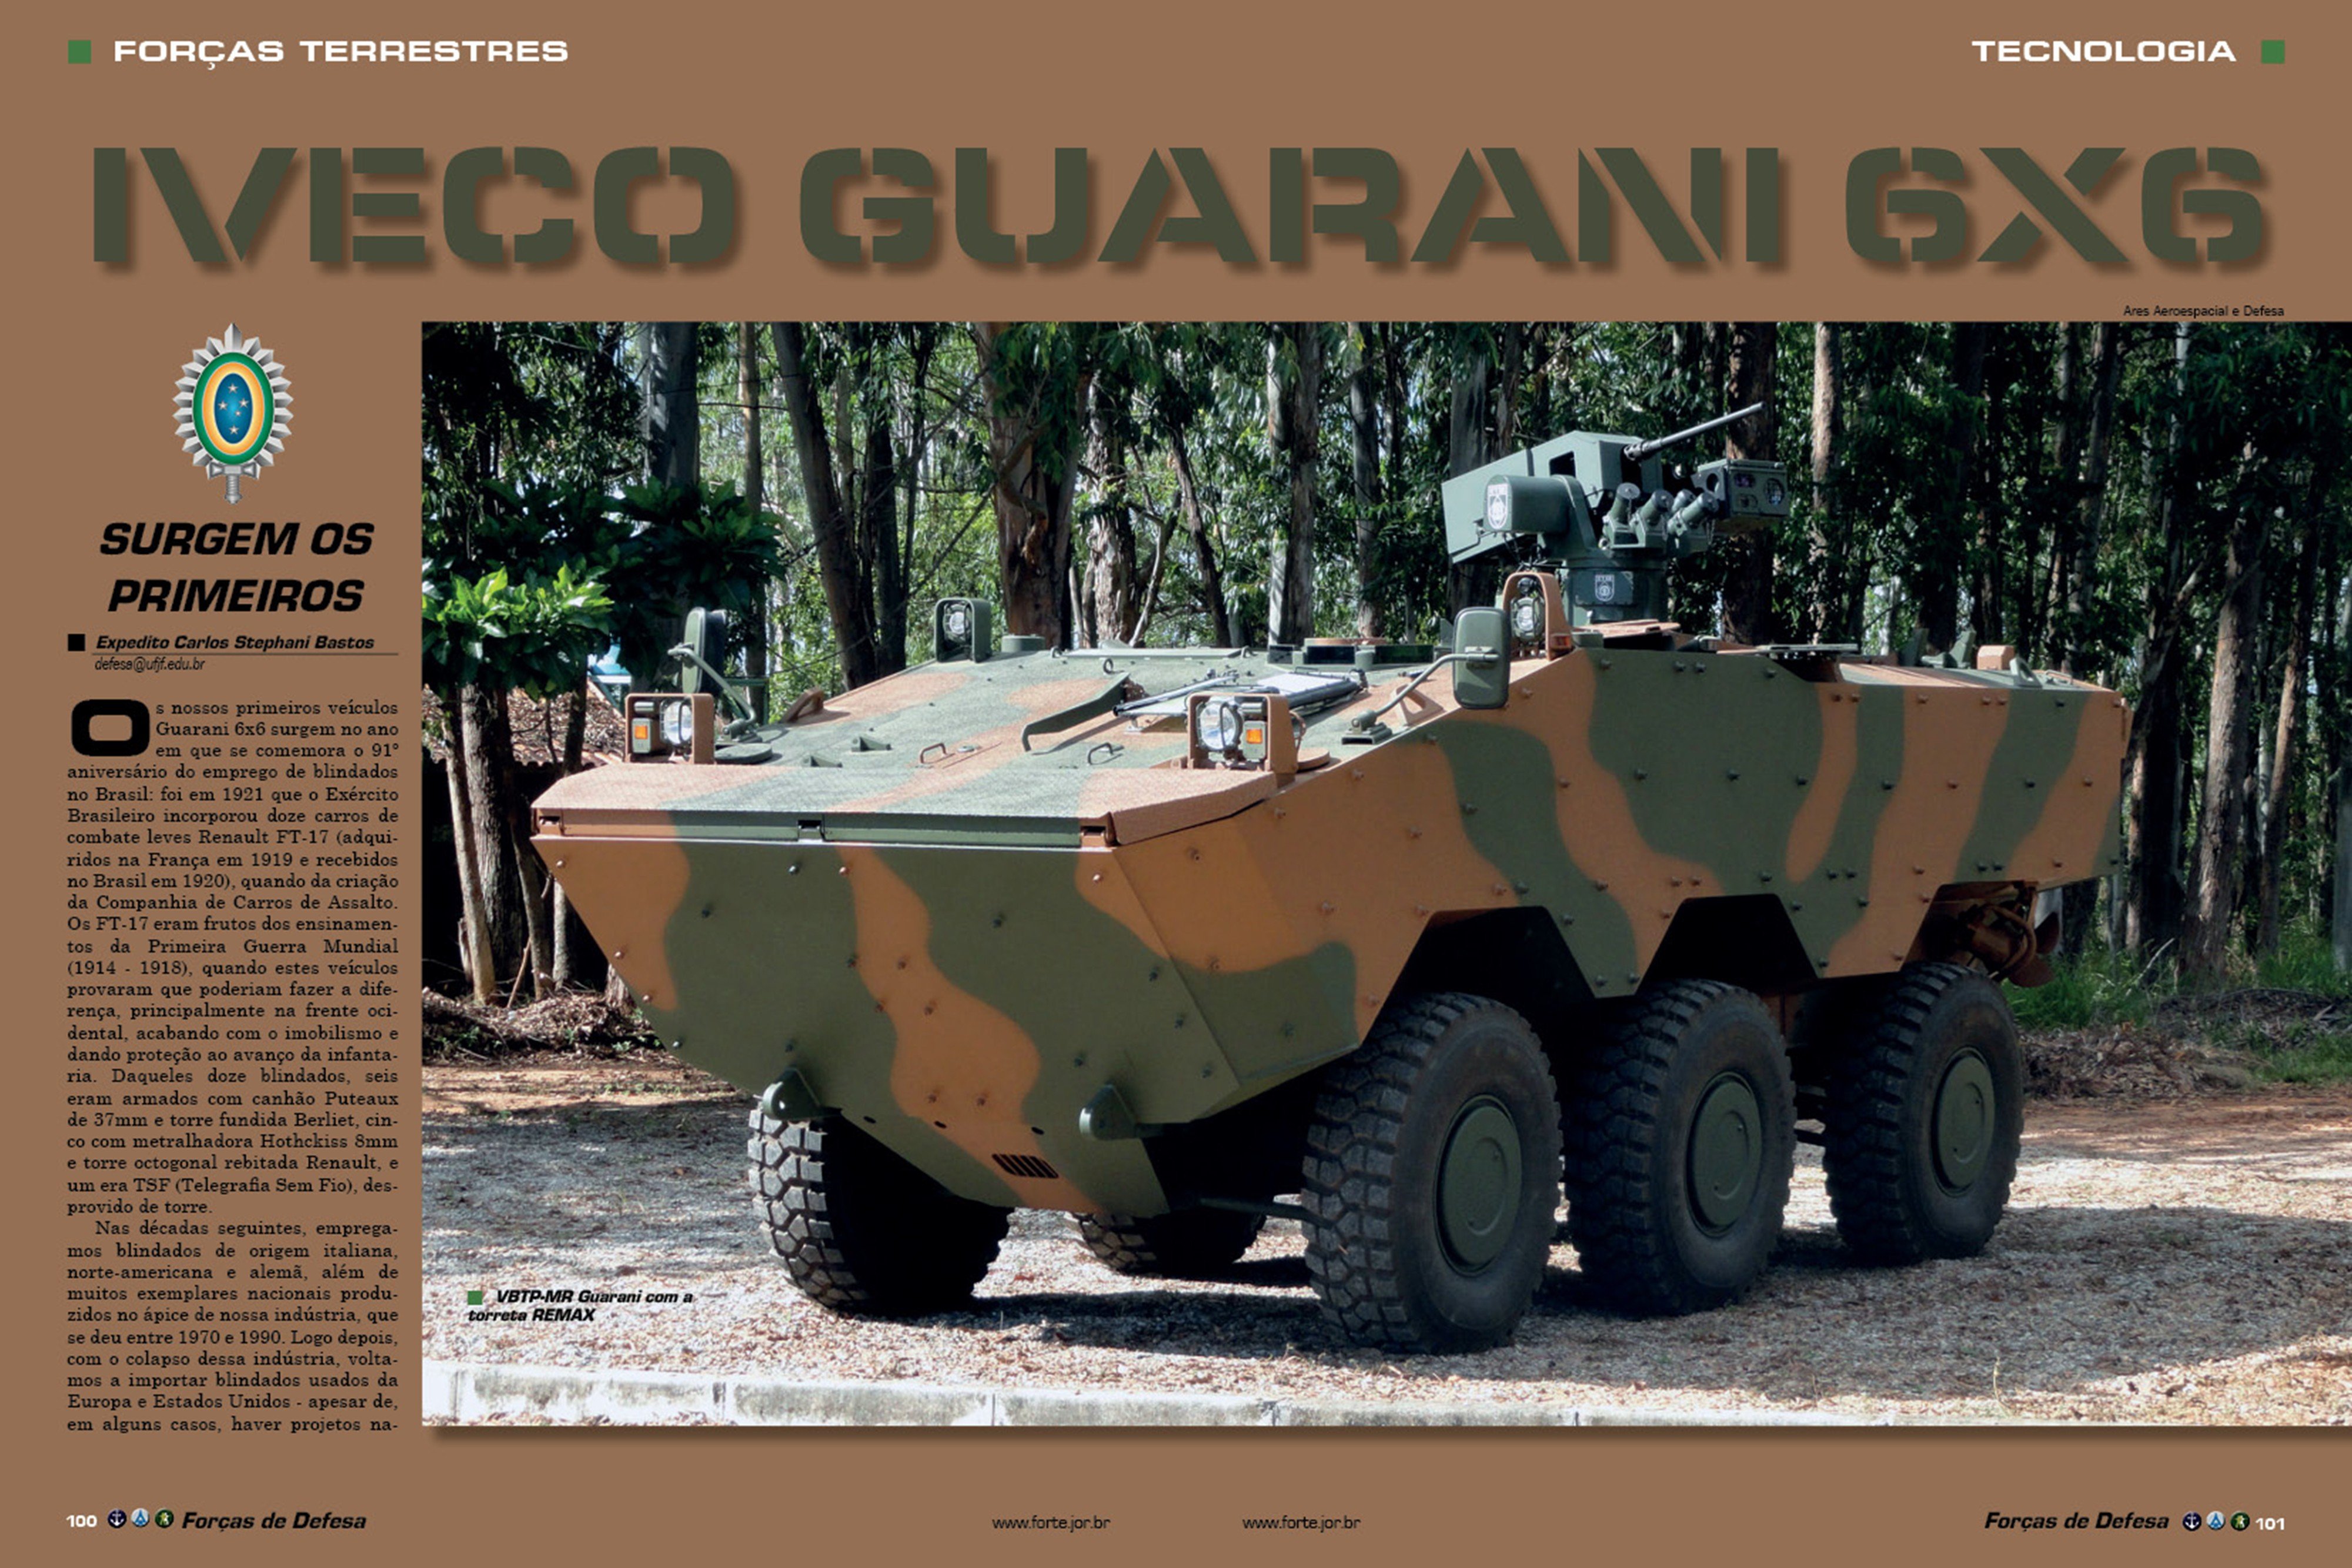 vehicle, Military, Army, Combat, Armored, Iveco, Guarani, Brazil,  7 Wallpaper